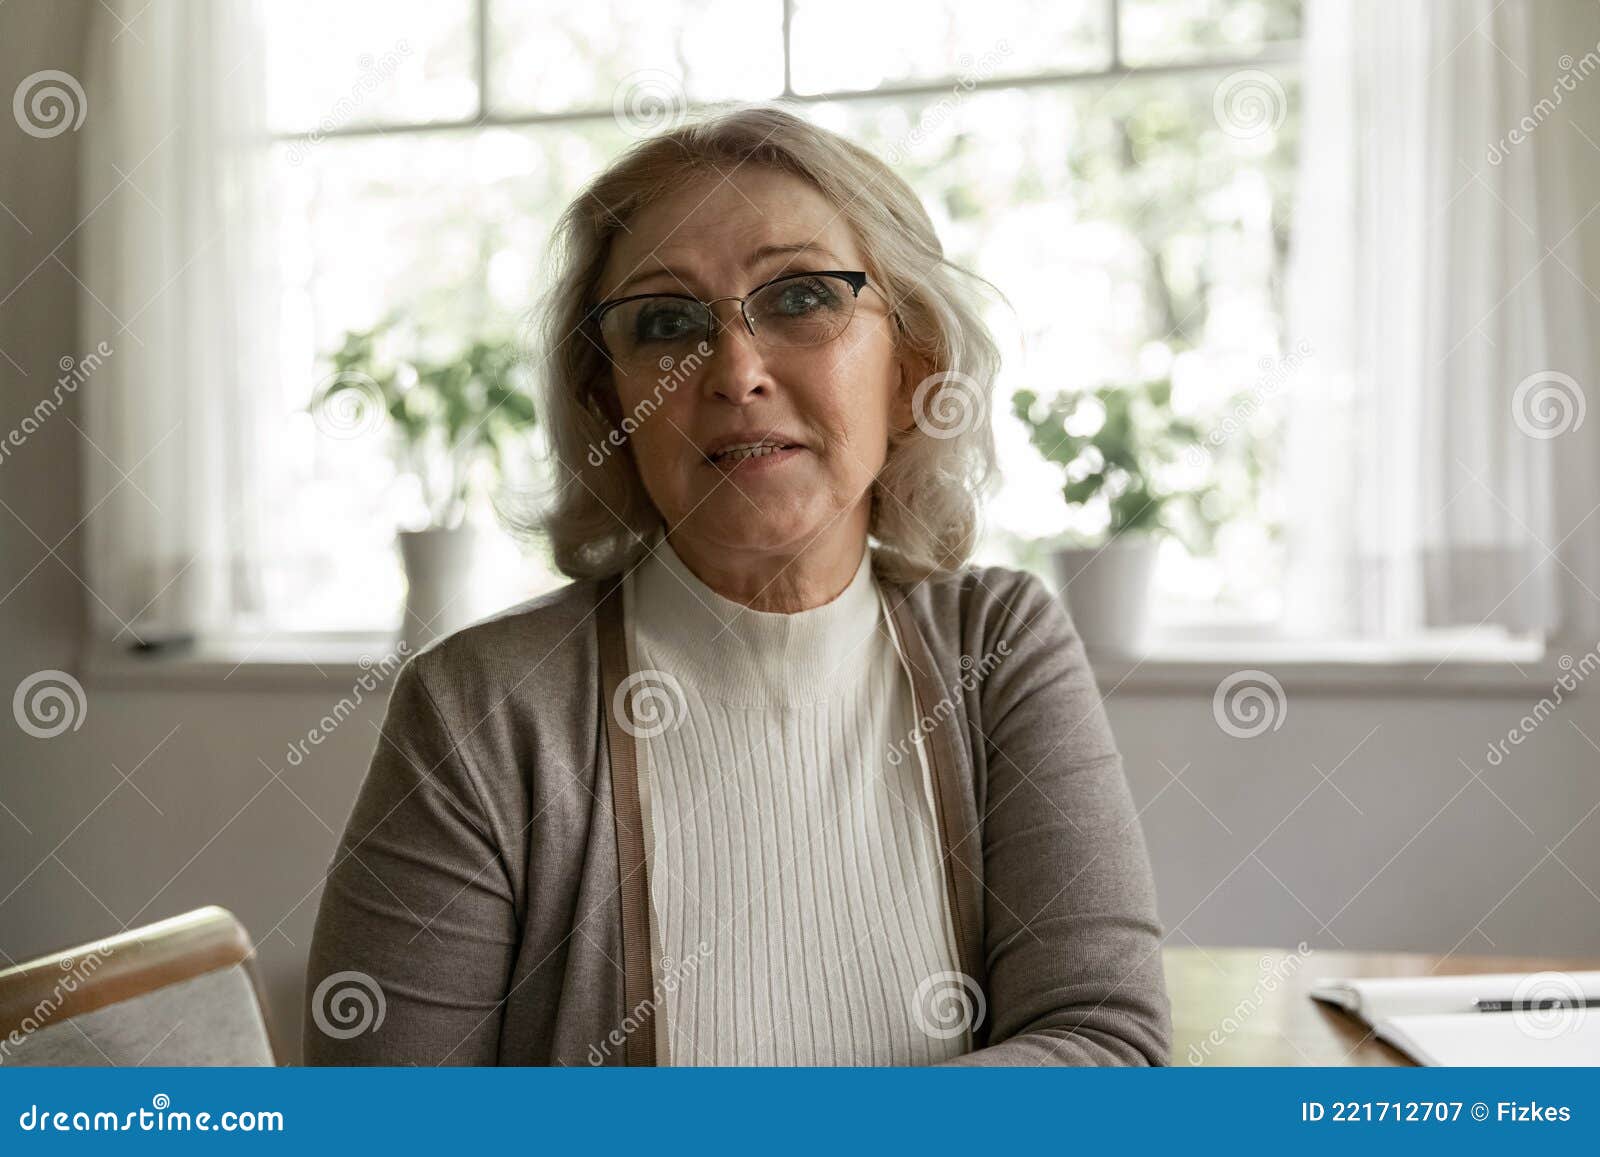 Headshot Portrait of Mature Woman Have Webcam Call Image - Image of home: